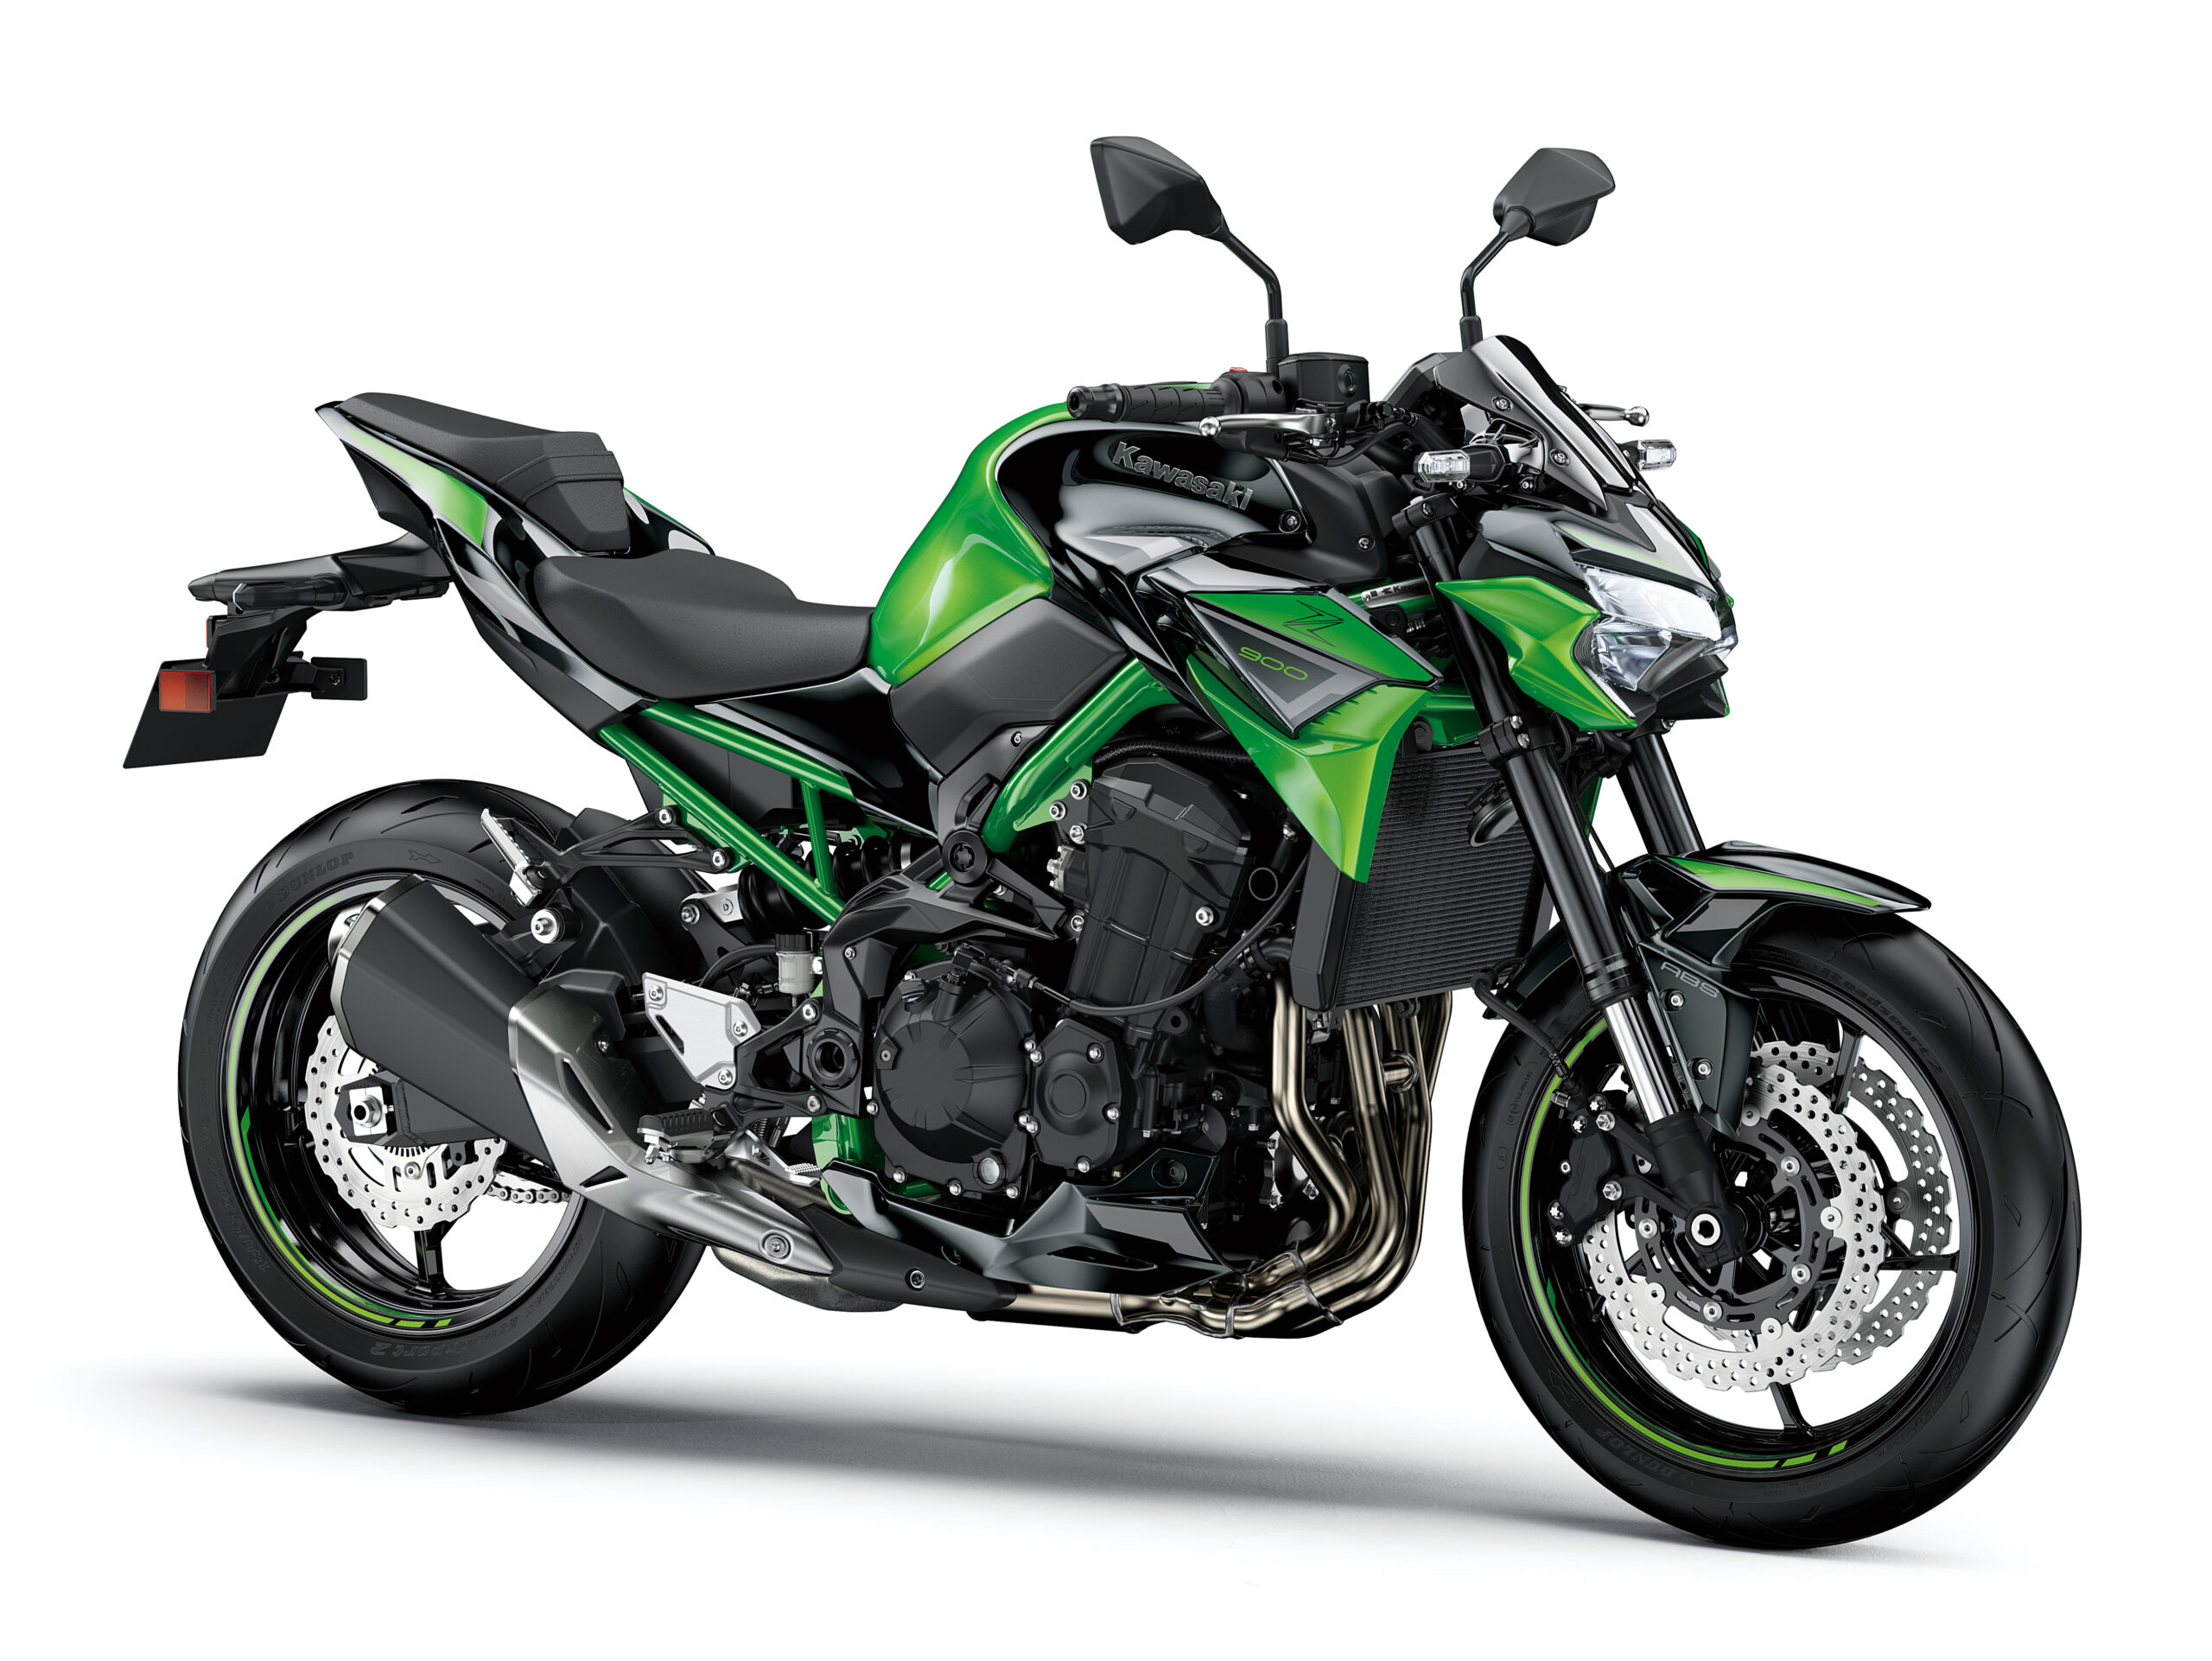 MY22 Kawasaki Z900 India Launch Price Revealed With New Color Addition